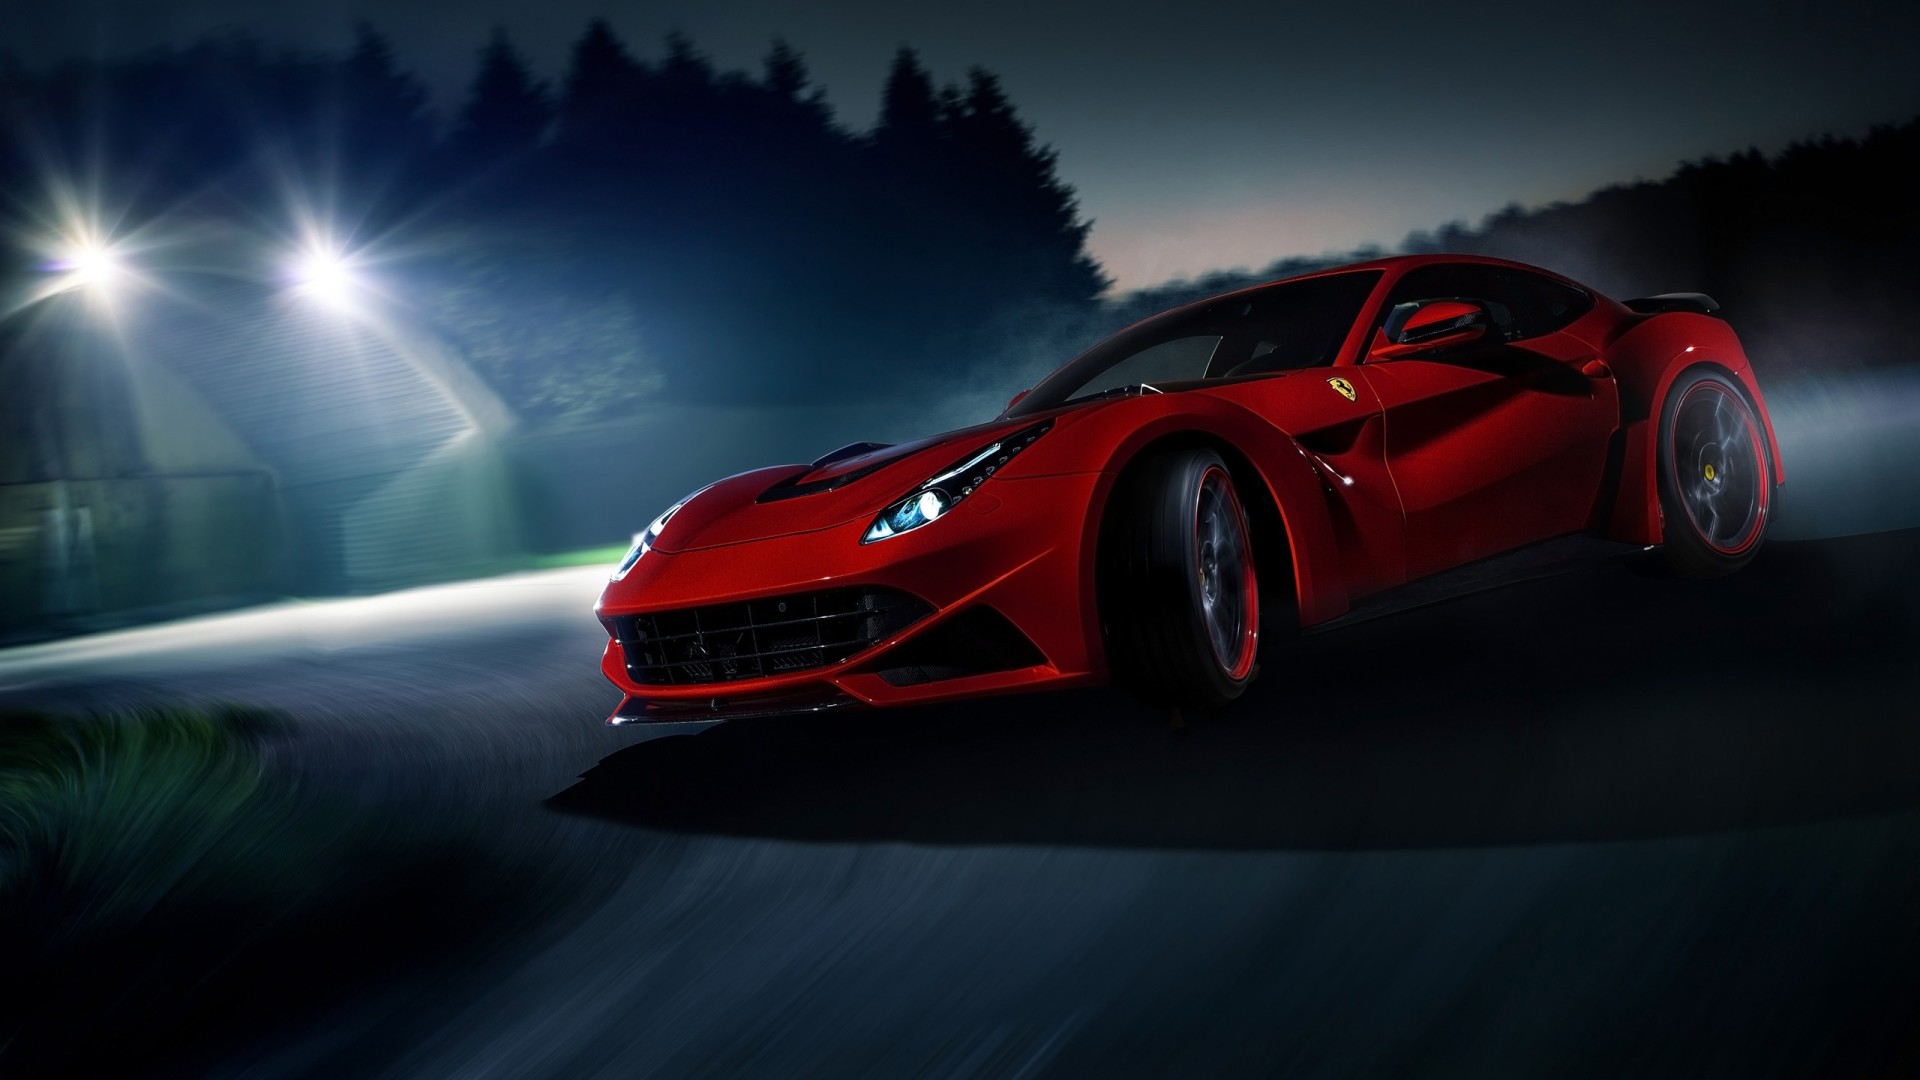 3d car wallpaper for pc free download Archives - Auto Maniac